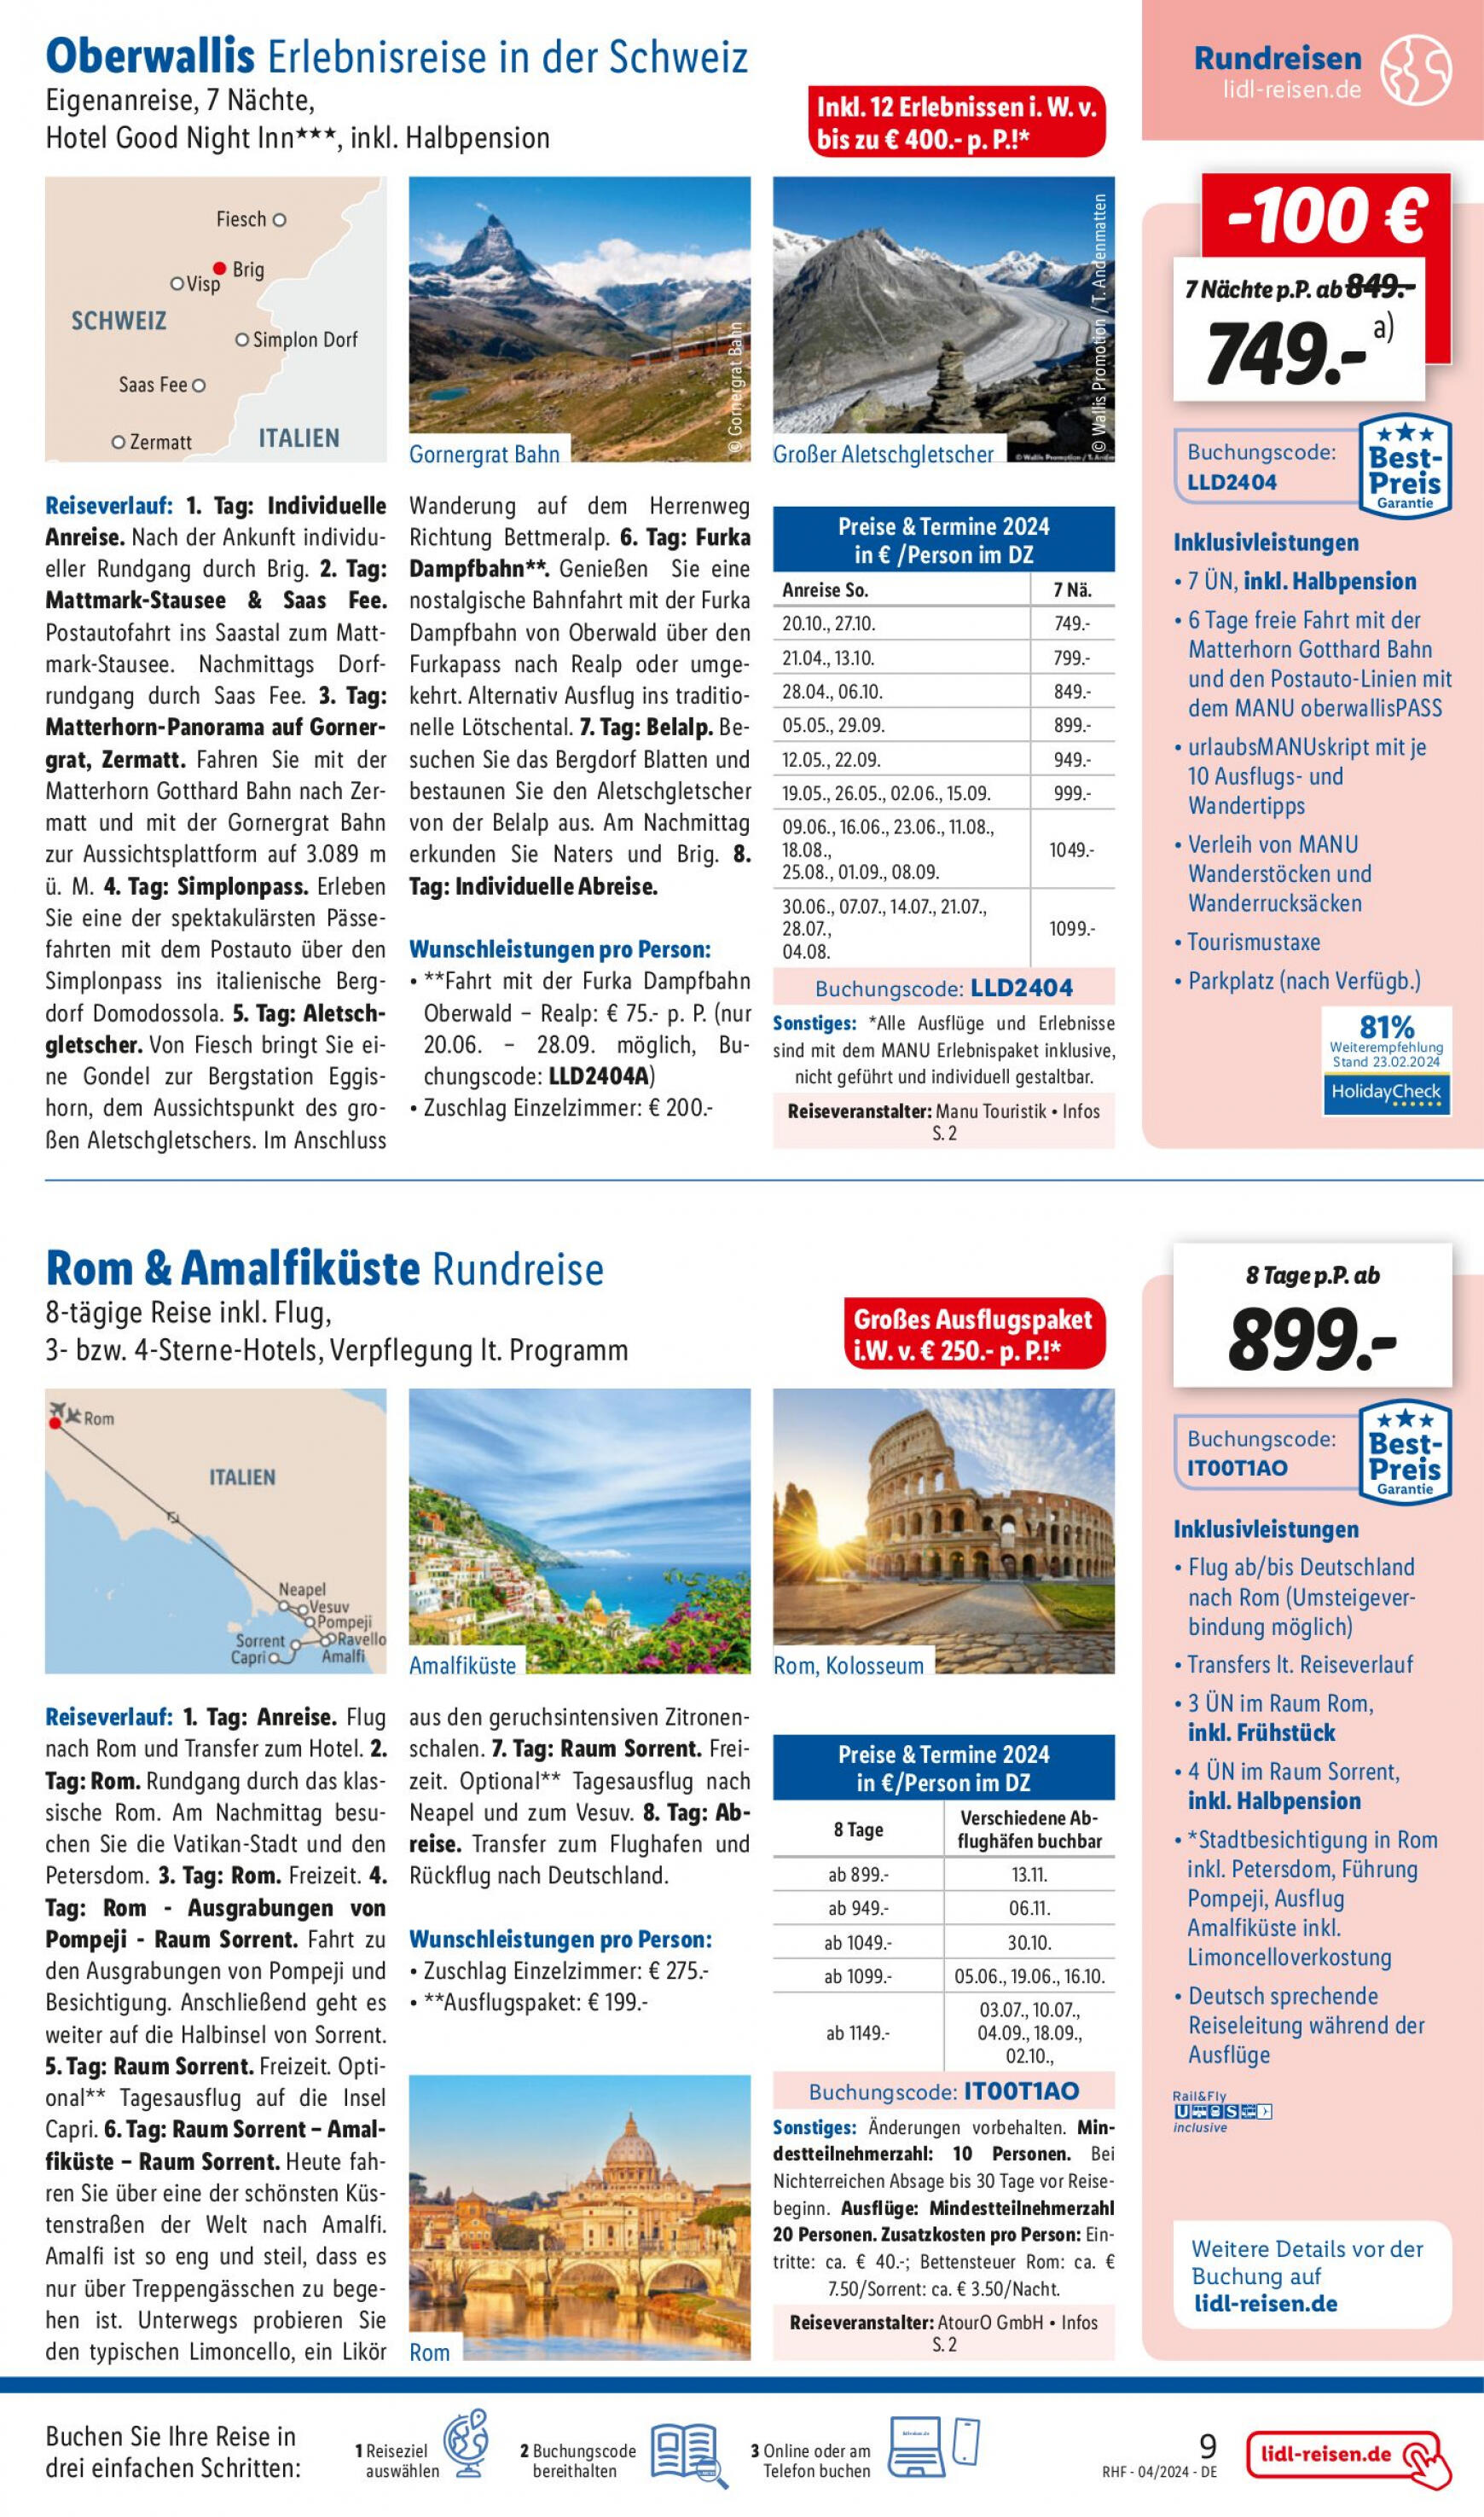 lidl - Flyer Lidl - April Reise-Highlights aktuell 27.03. - 30.04. - page: 9